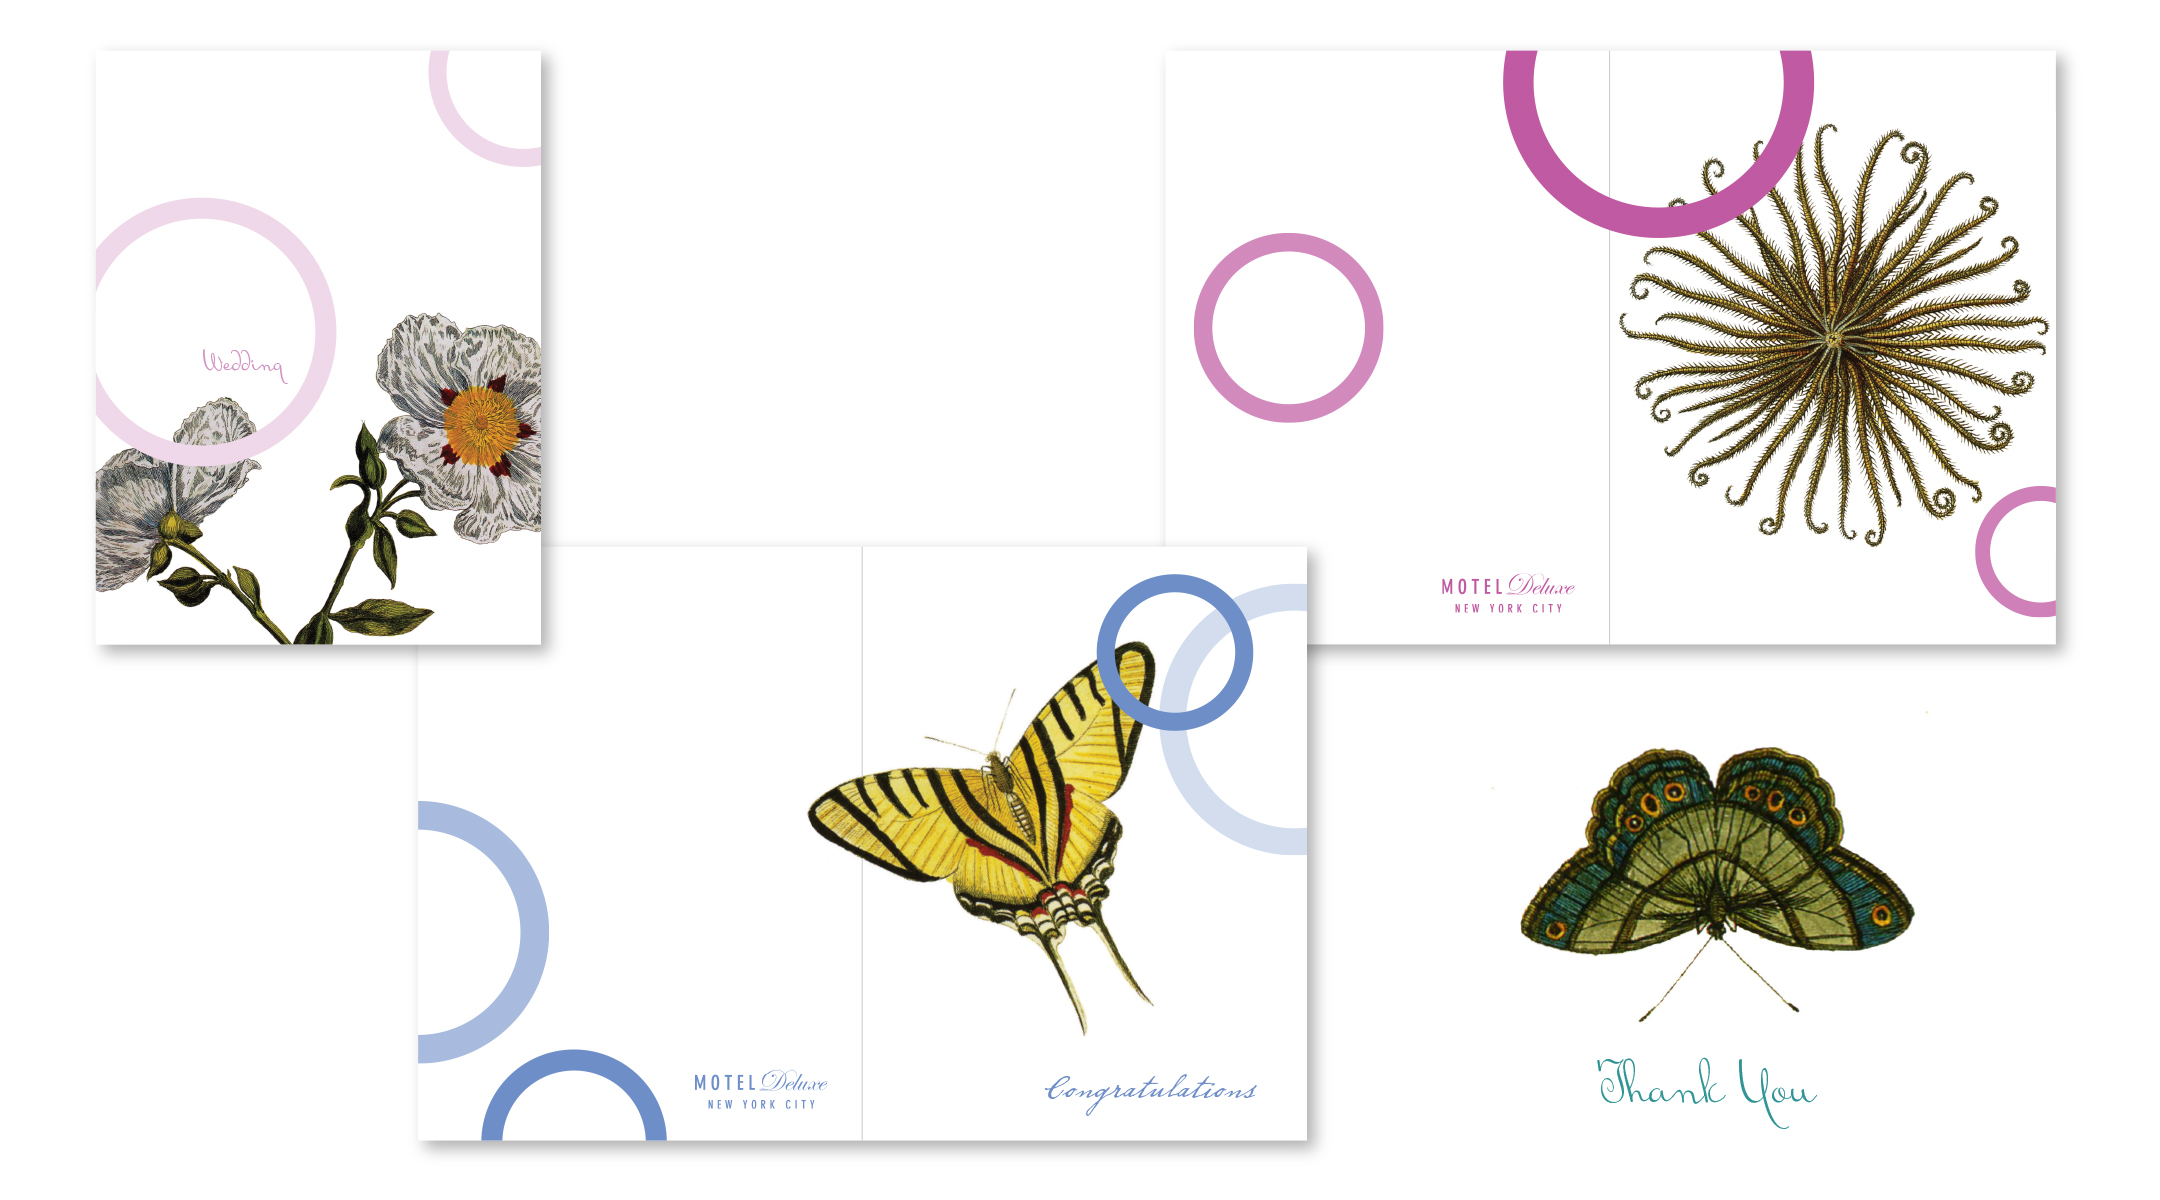 A suite of nature greeting cards created for Motel Deluxe.